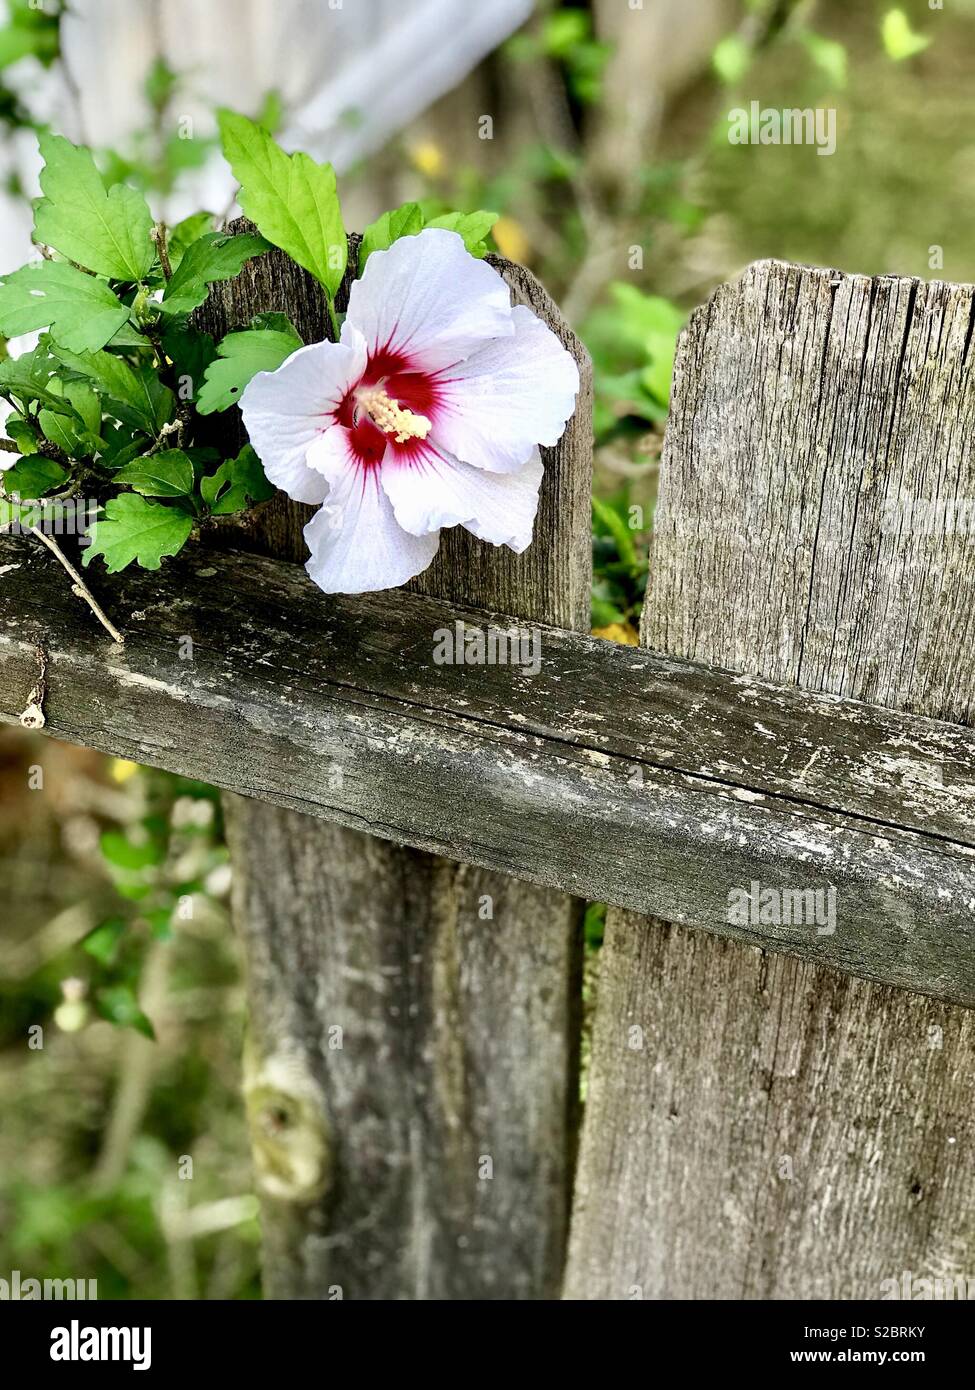 Picture of rose of Sharon flower growing up on dilapidated wooden deck Stock Photo